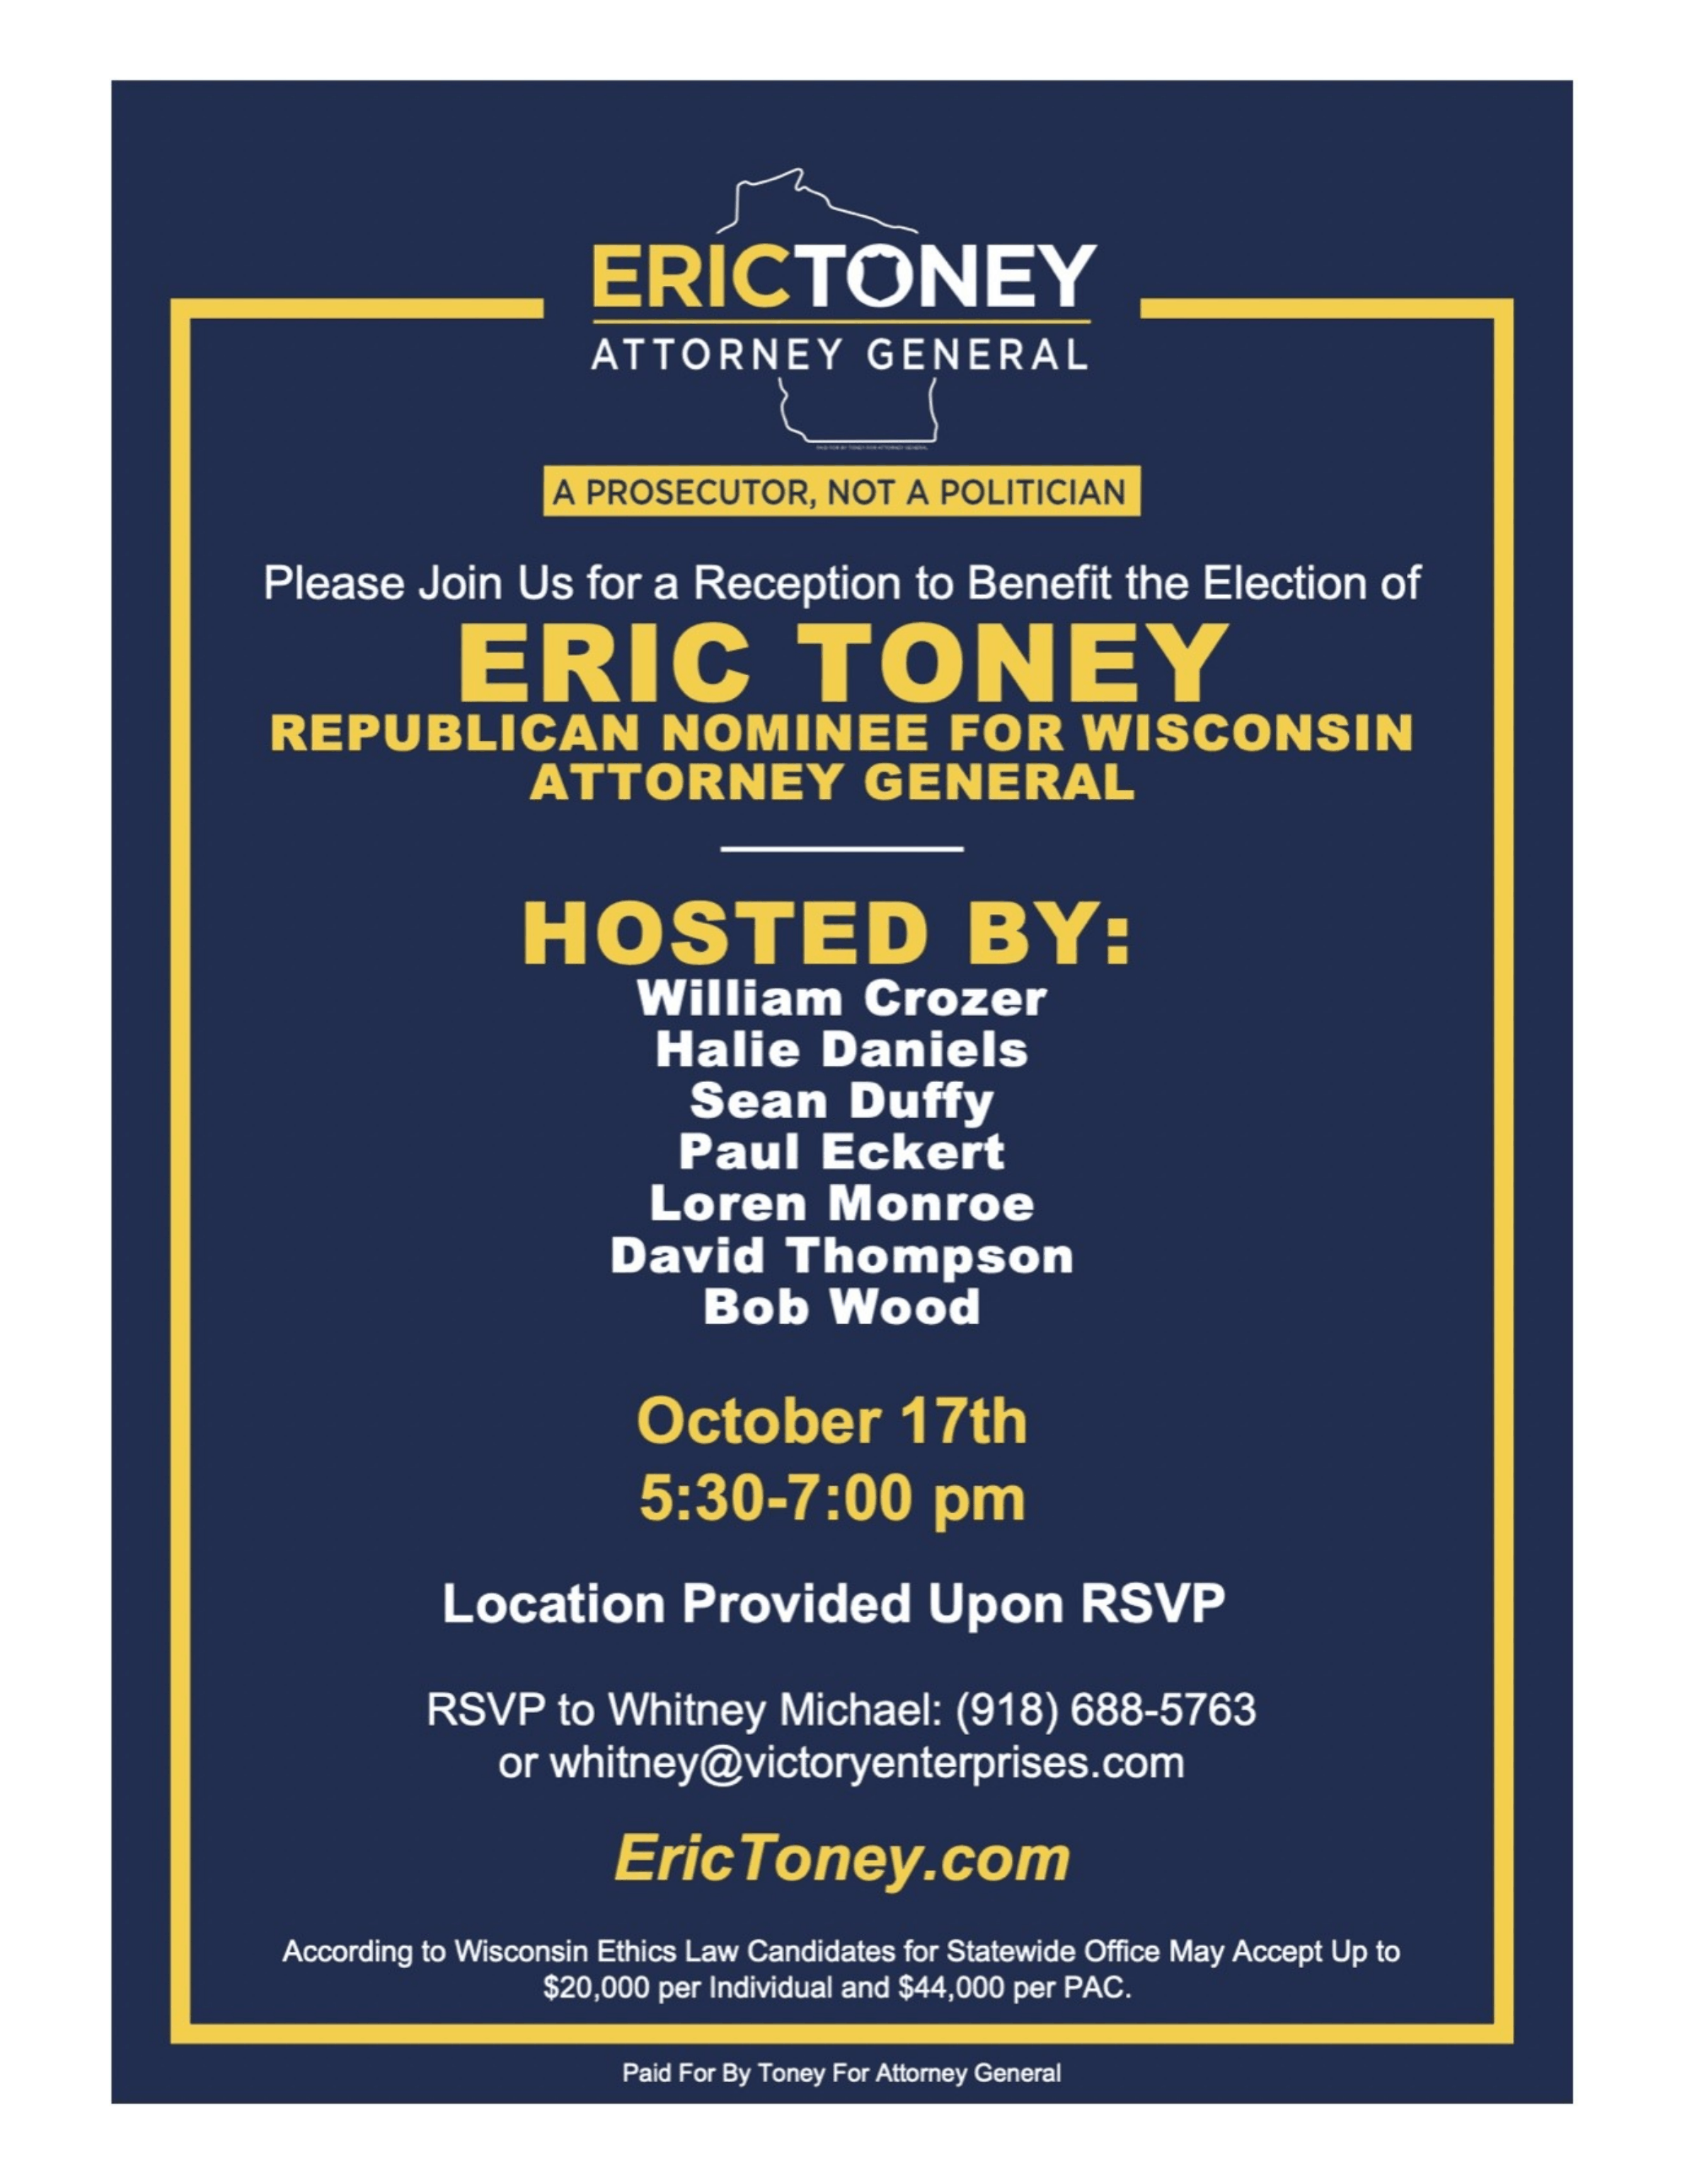 Page 1 of Fundraiser Invitation for Wisconsin Candidate for Attorney General Eric Toney, October 17, 2022